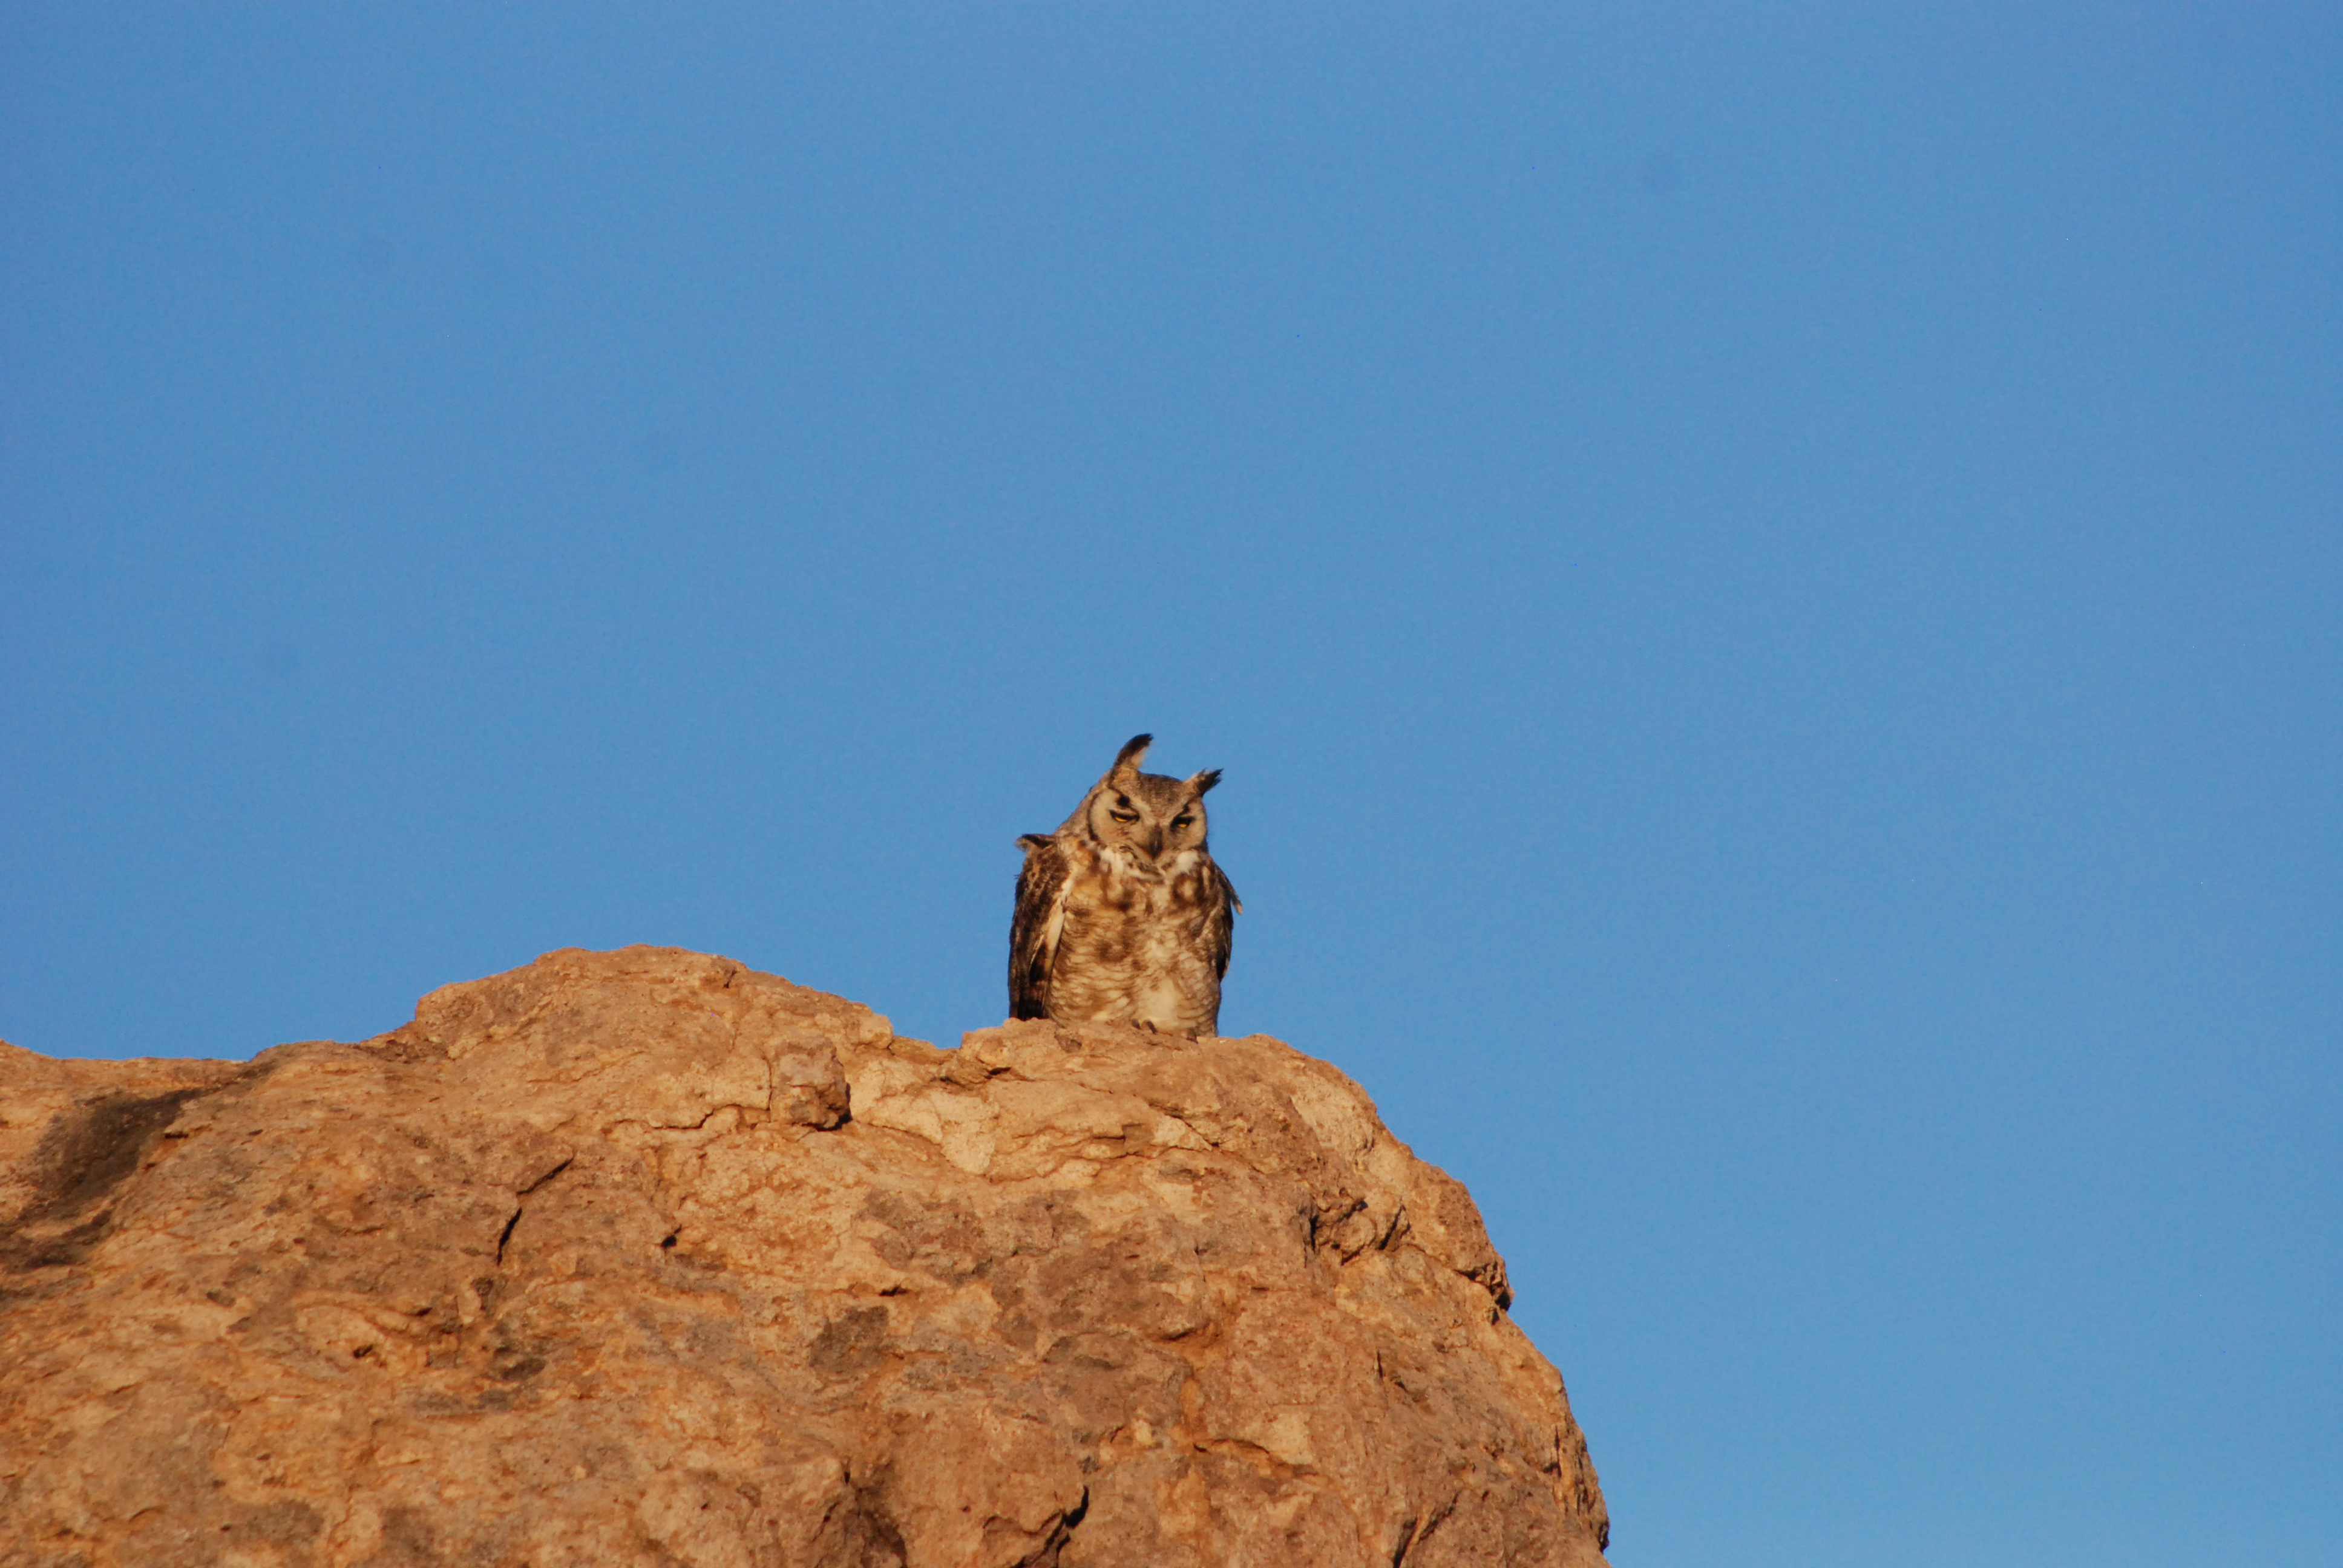 a Great Horned Owl at City of Rocks